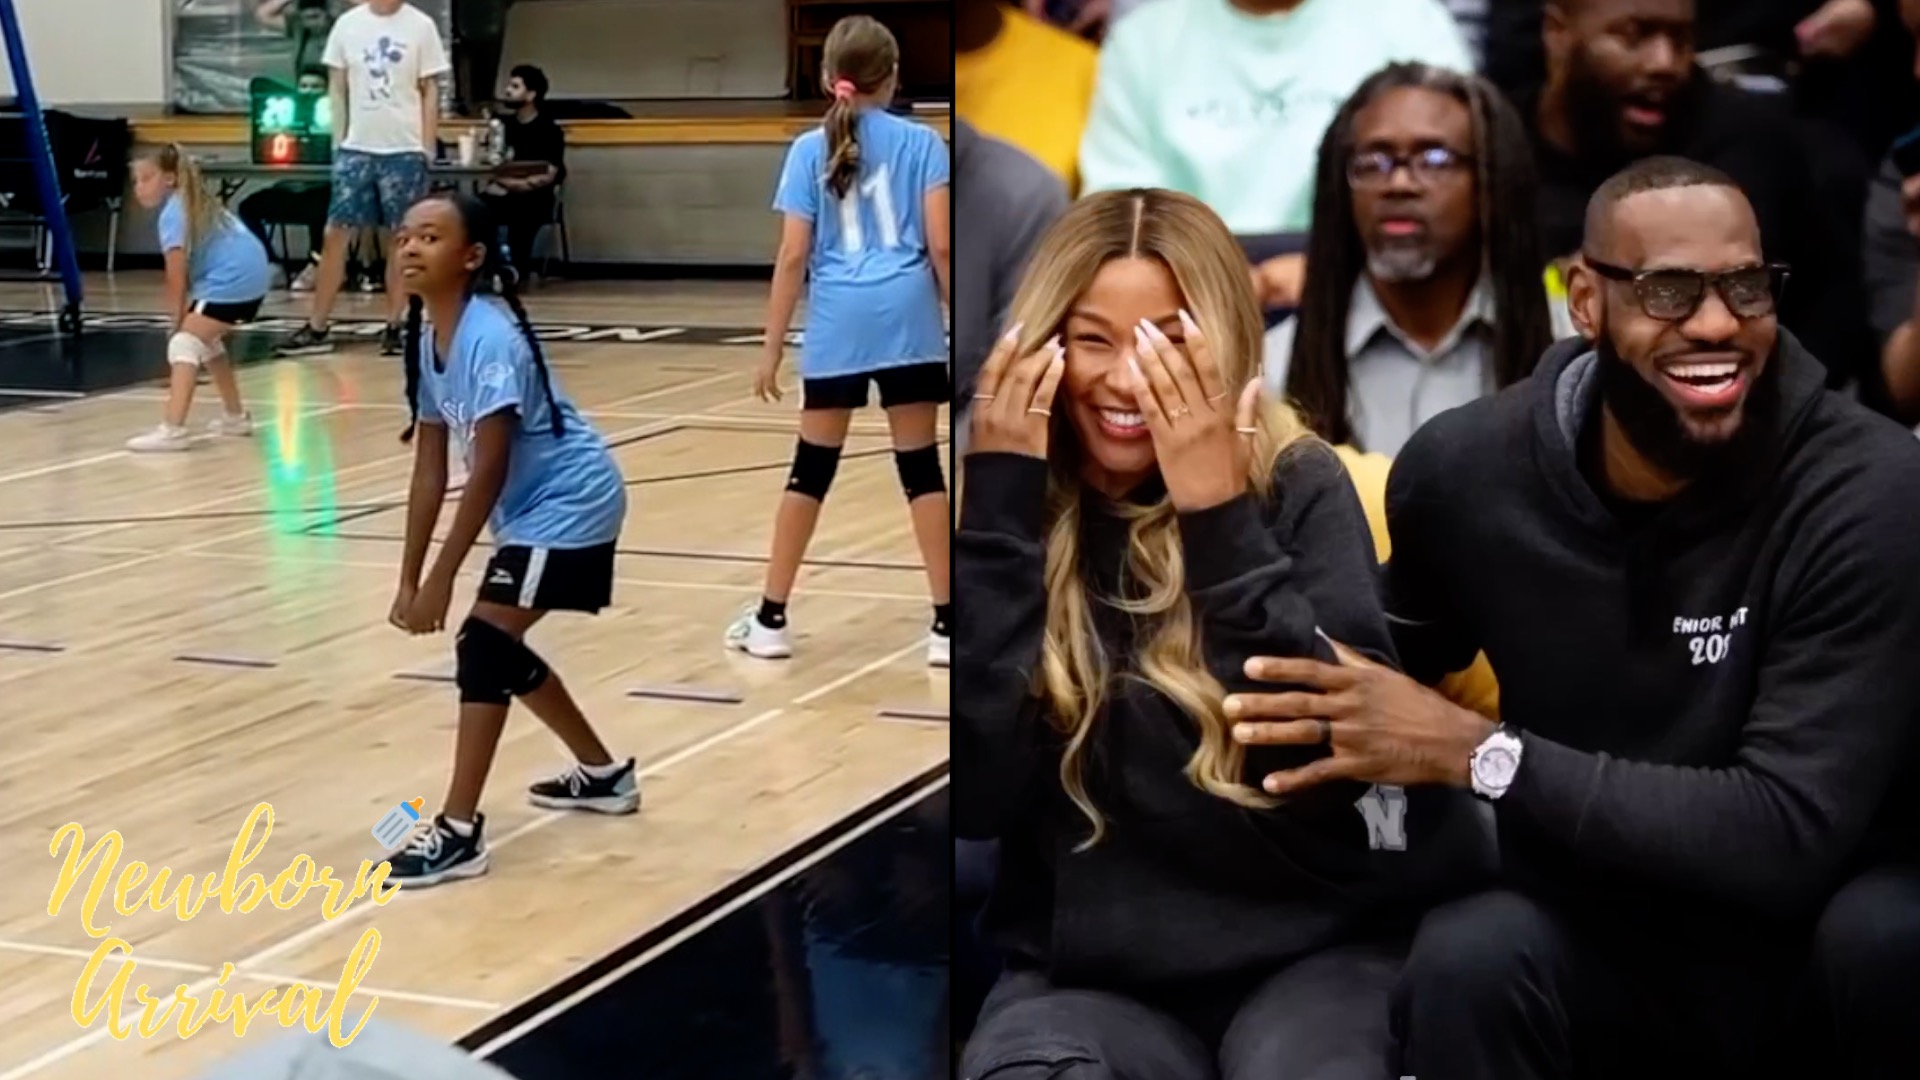 Zhuri star! LeBron James shows up to his daughter's volleyball game in full sports dad style